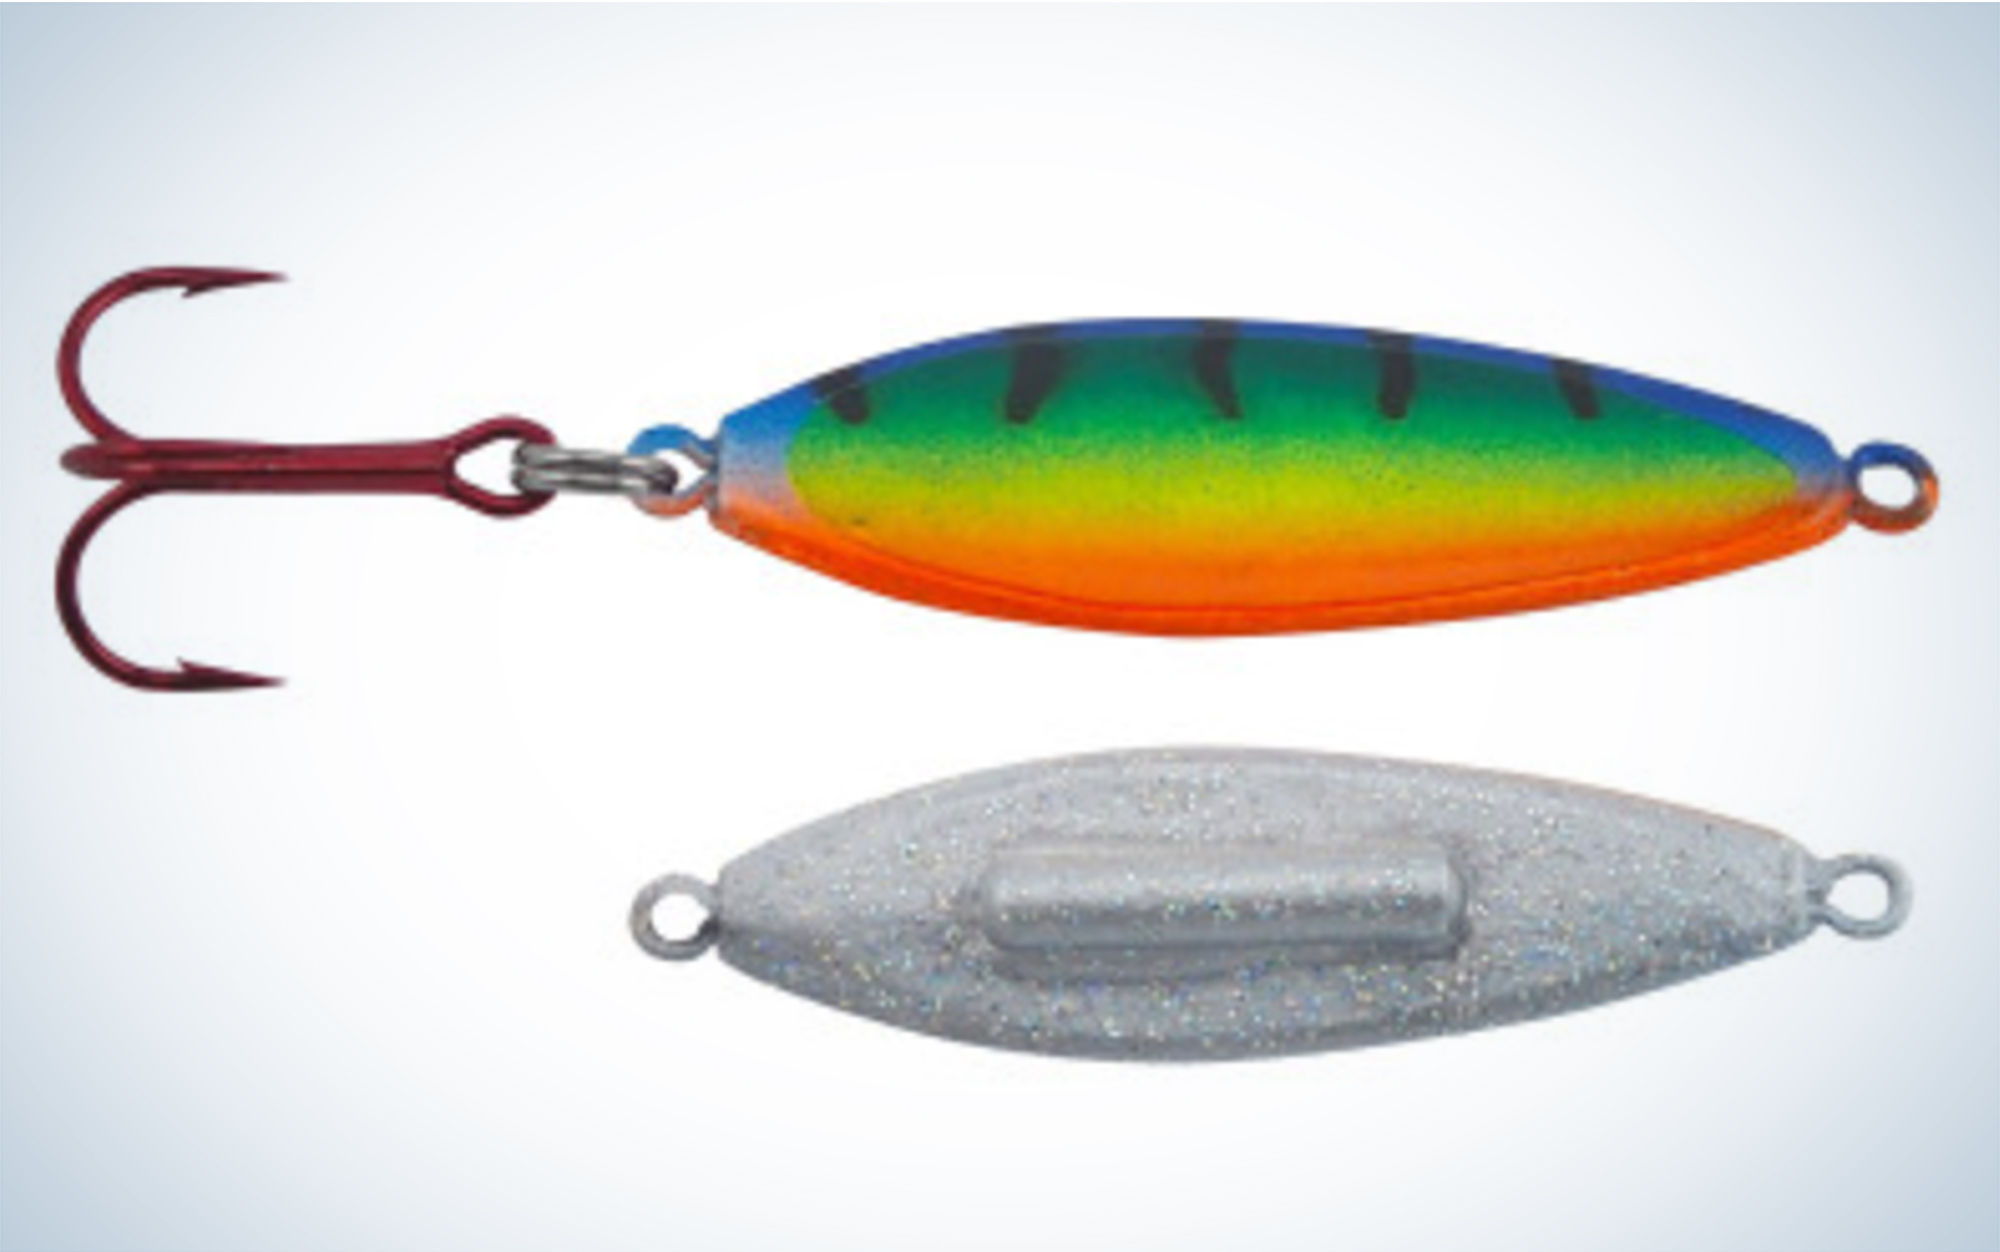 The Silver Streak Rattle Streak Spoon is one of the best walleye ice fishing lures out there.